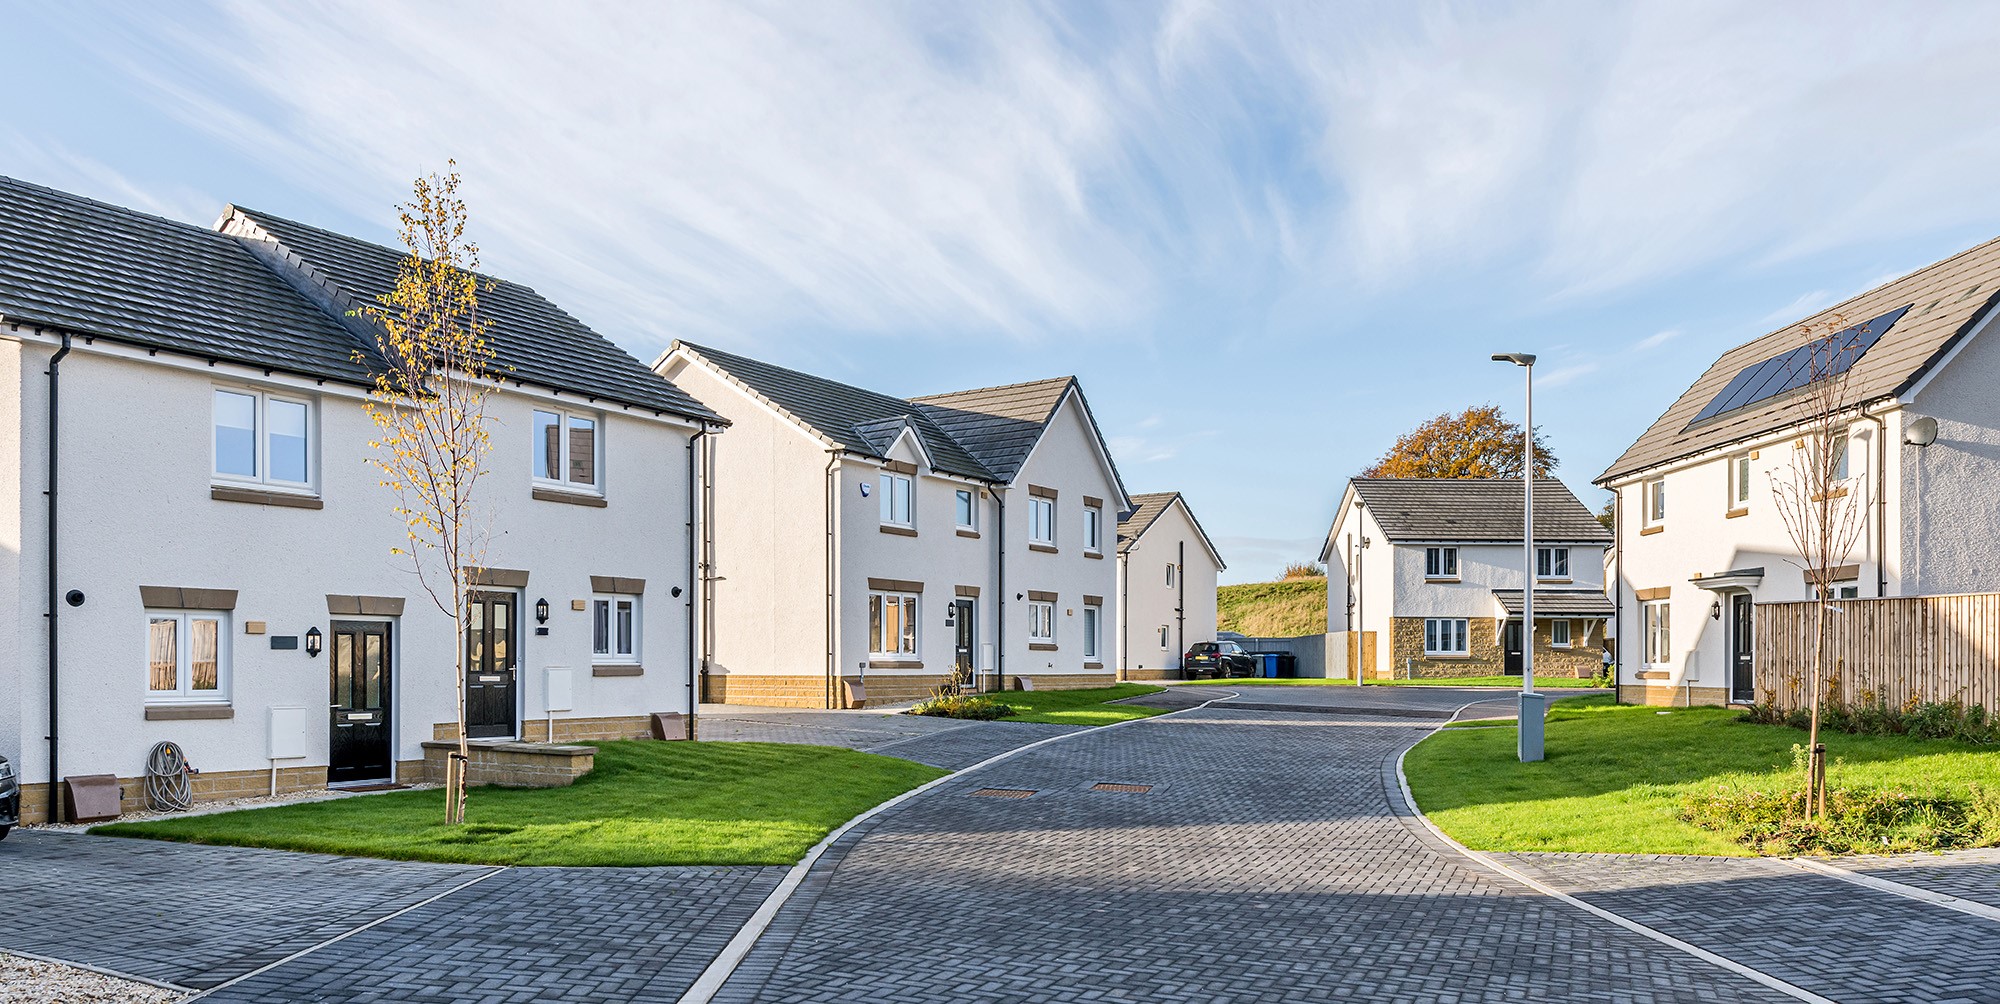 Taylor Wimpey to host public consultation event for 137 new homes in Carnbroe